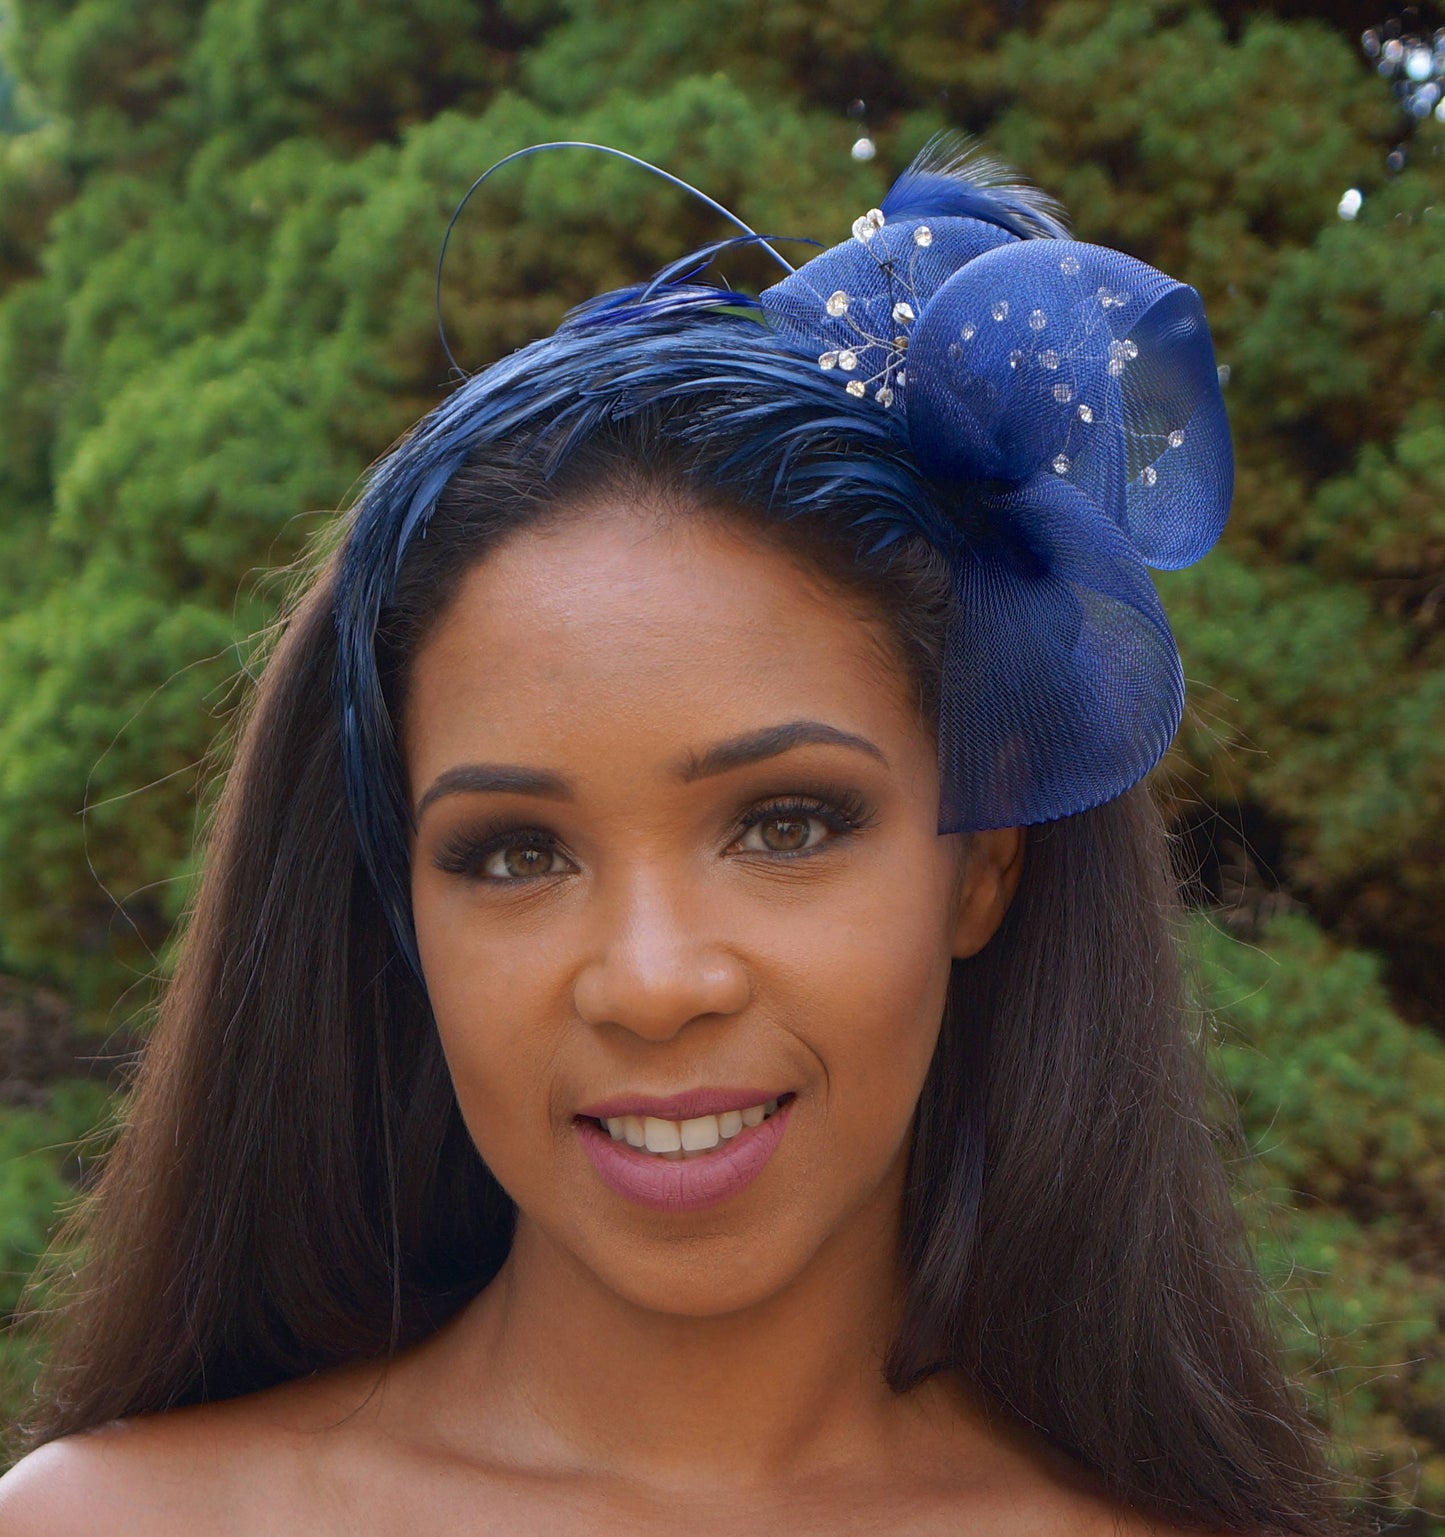 ROYAL BLUE Feather headband-Crinoline-bling Perfect for ALL Occasions-Weddings-Brides Maids-Proms-Races-Parties-Teens-Holidays-Polo Matches-